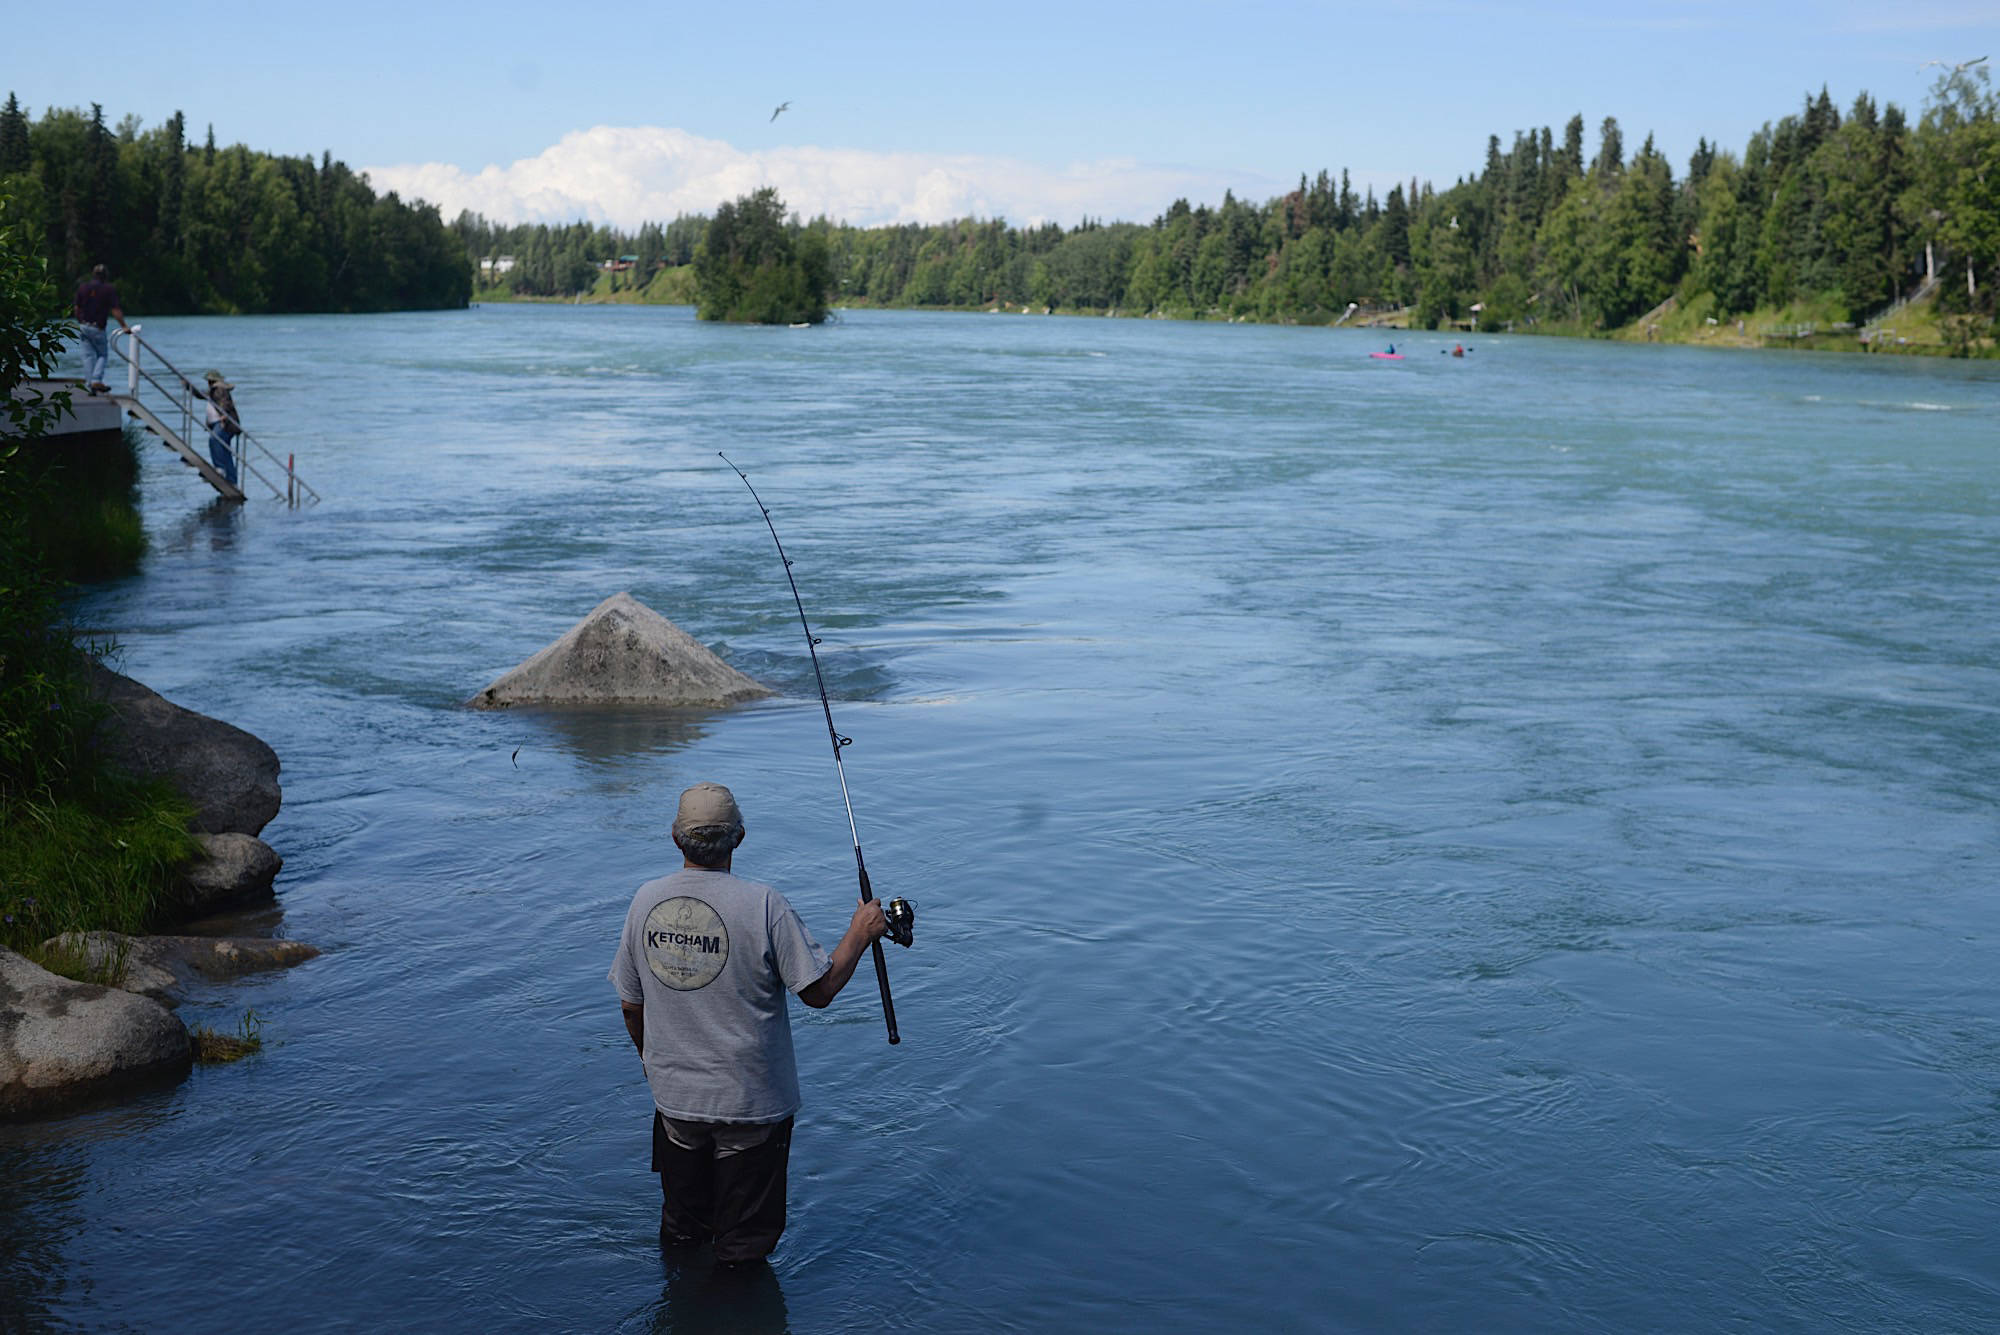 A man fishes on the Kenai River on July 16, 2018, in Soldotna, Alaska. (Peninsula Clarion/file)